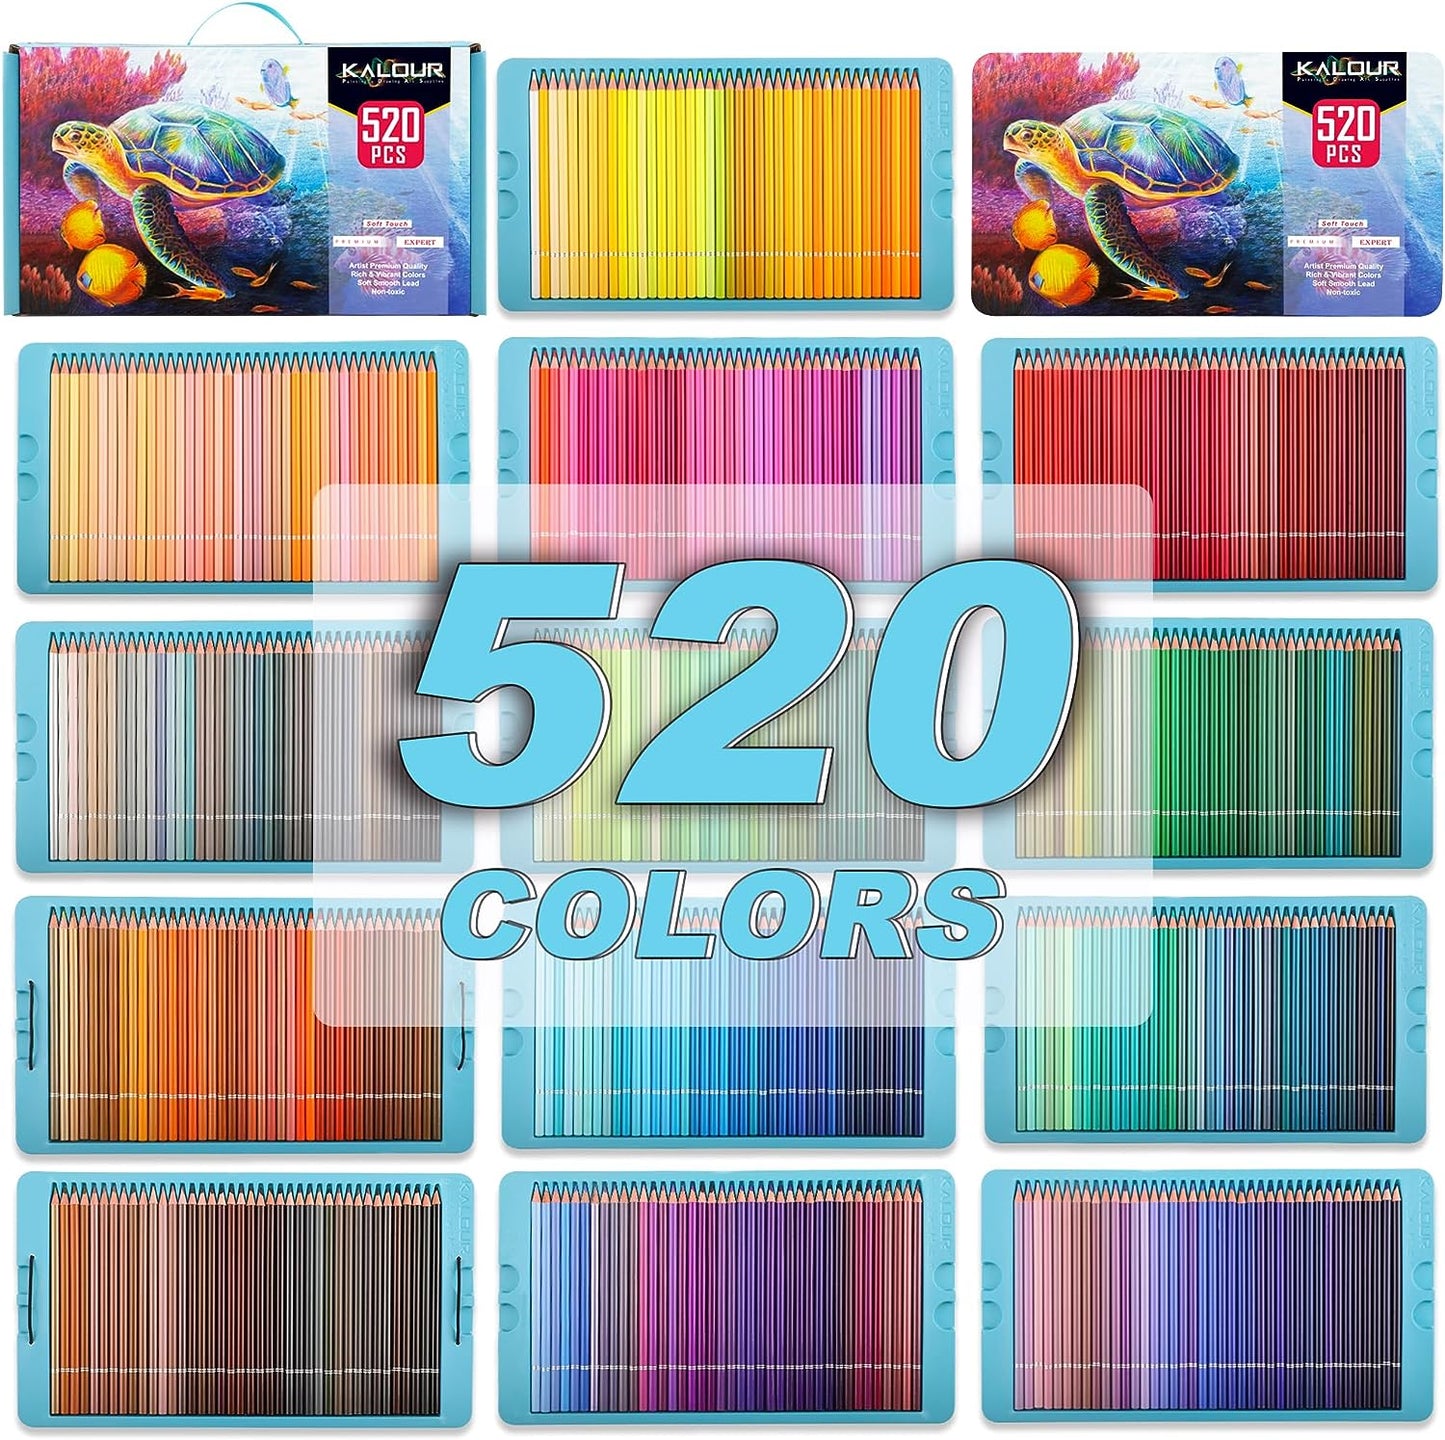 KALOUR Colored Pencils,Set of 520 Colors,just $109.99 free shoping.